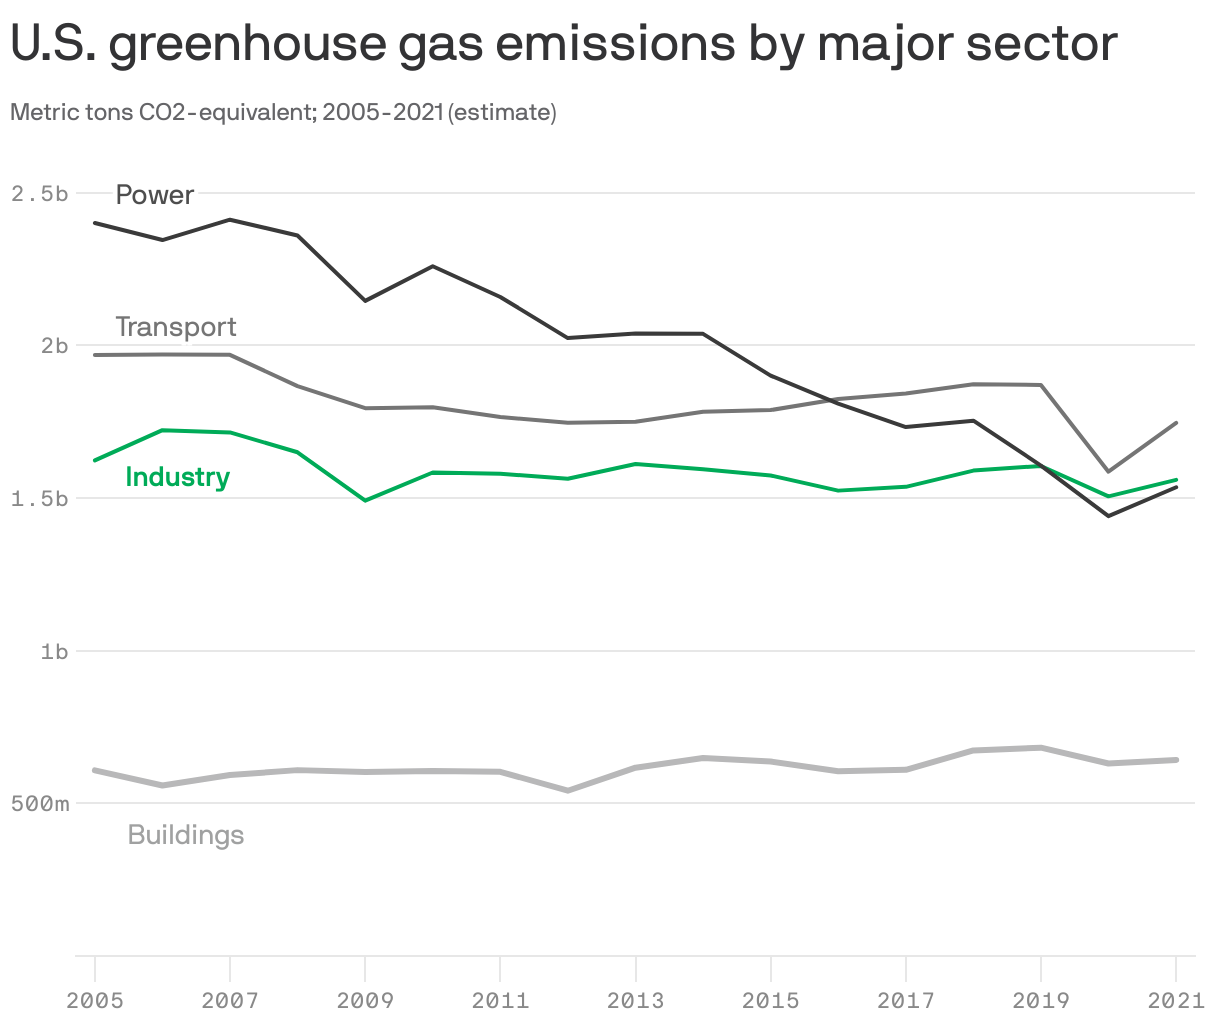 U.S. greenhouse gas emissions by major sector